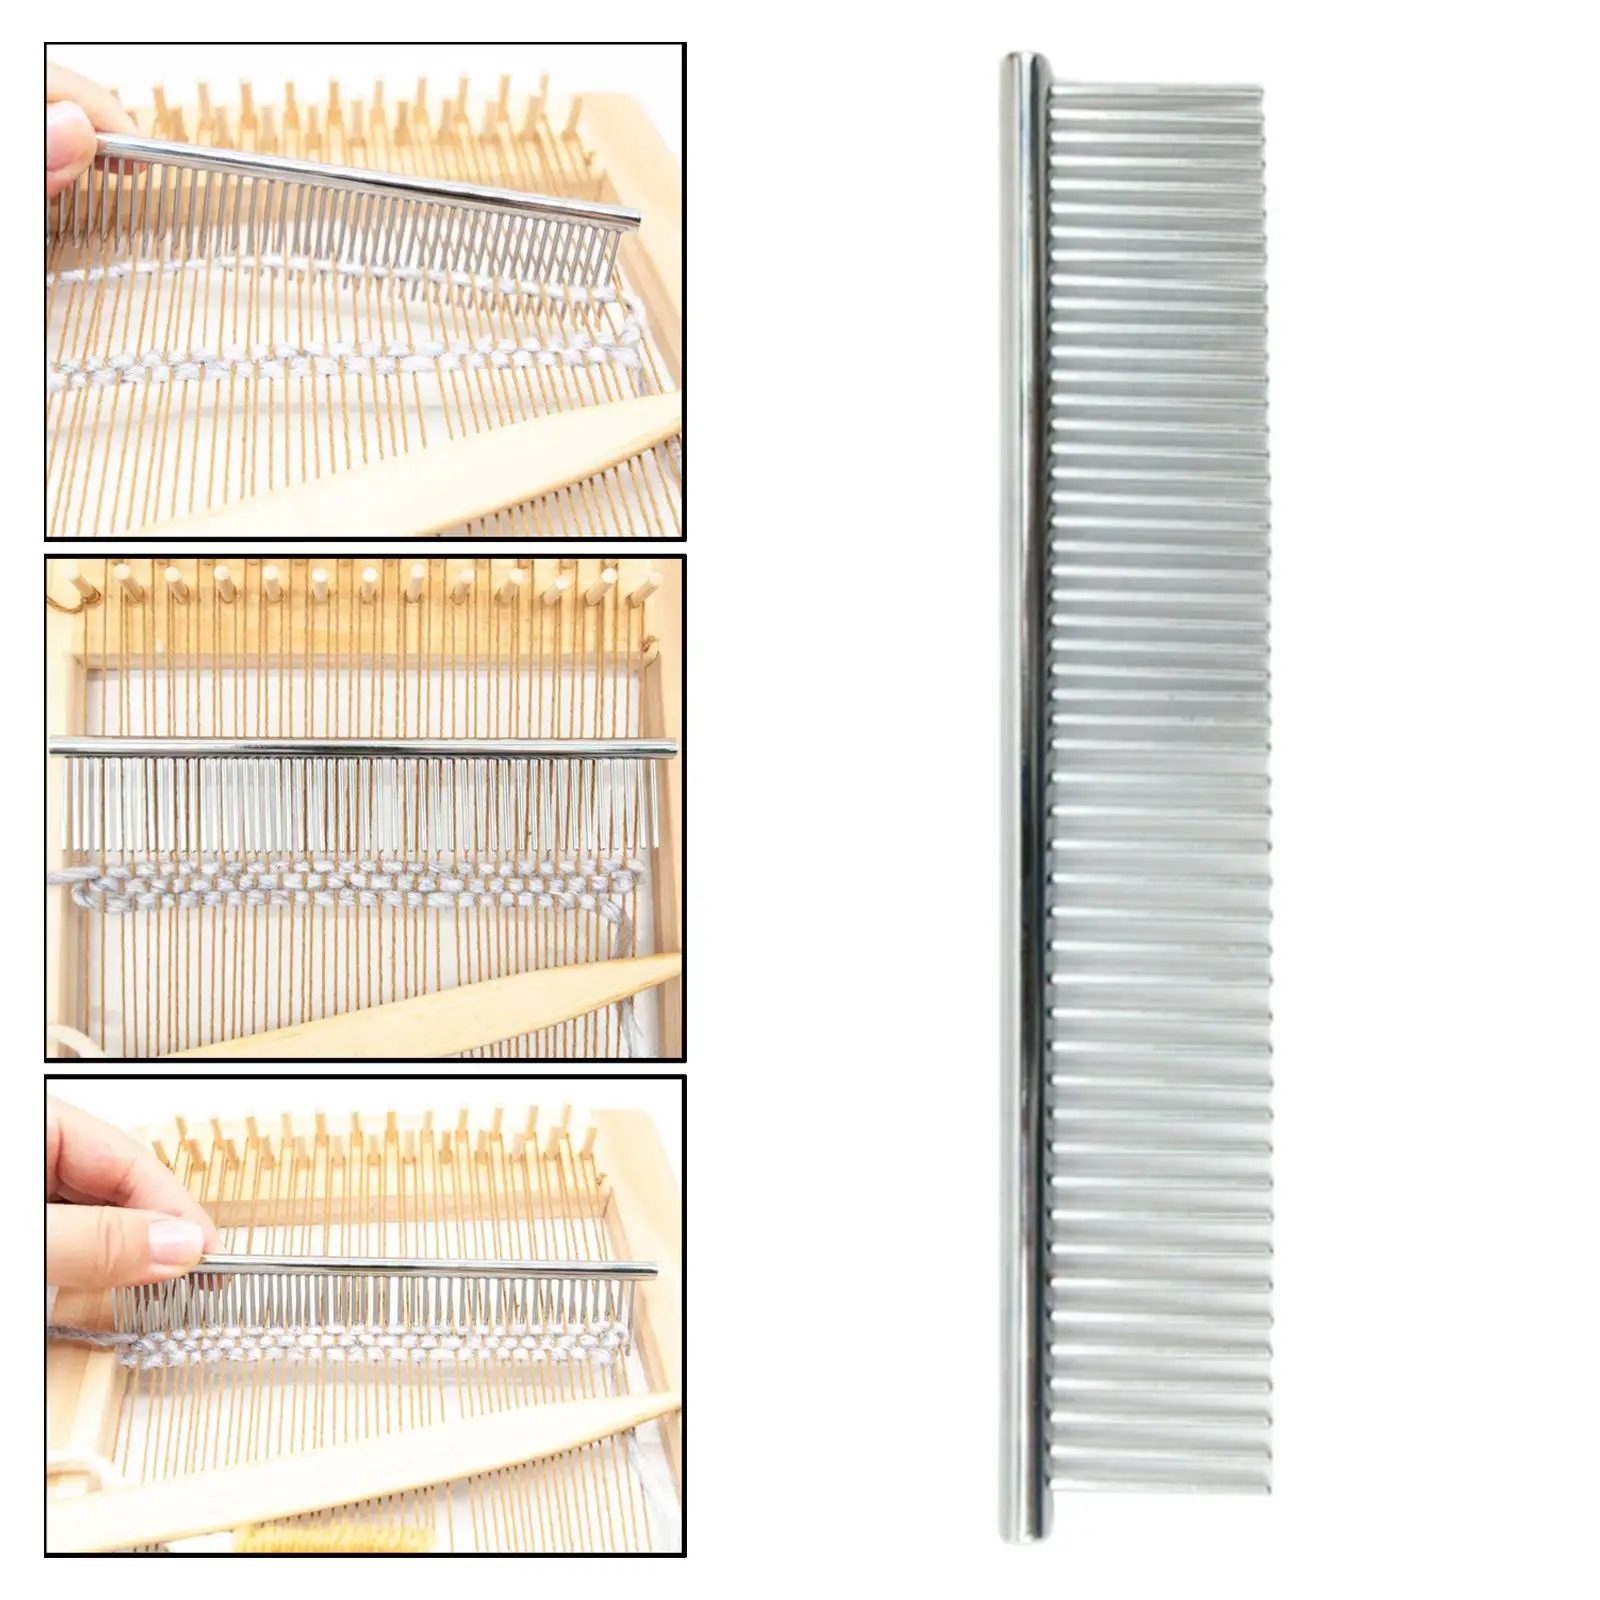 Macrame Fringe Comb Durable Stainless  for Fiber Knotting Art for Brushing Through Cotton Cord for DIY  Hangers Wall Hanging